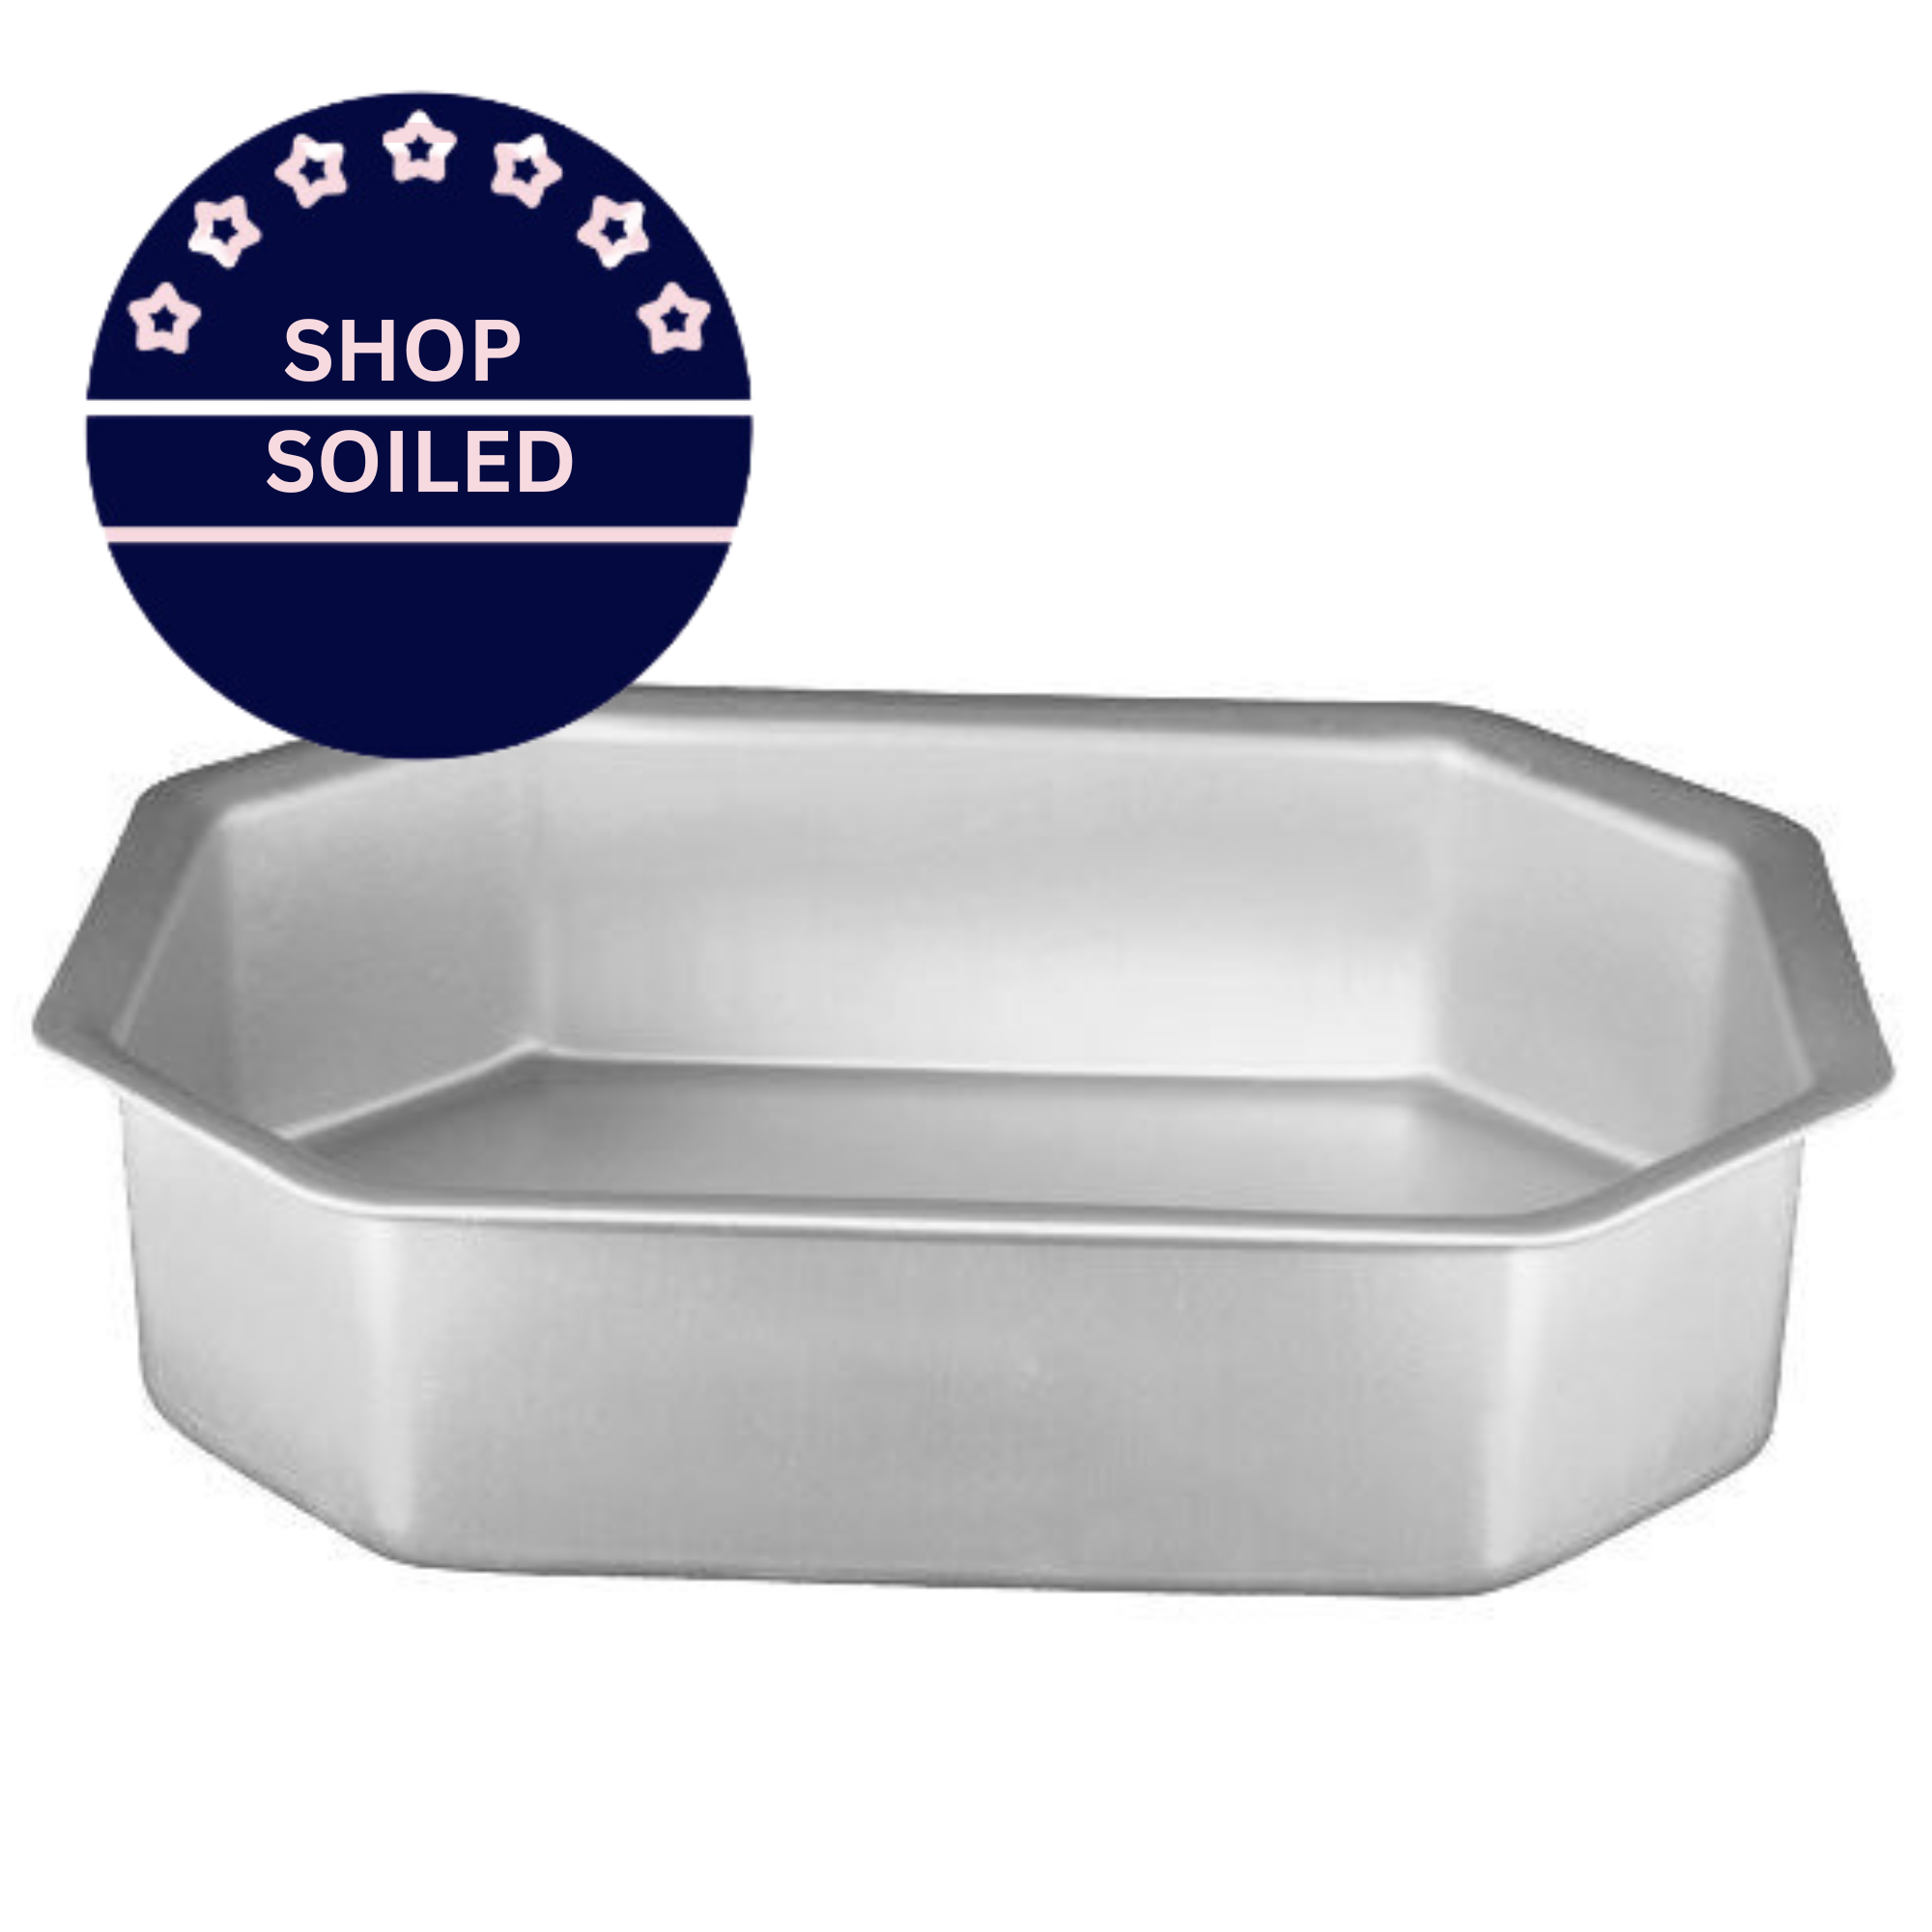 Fat Daddio's from Silverwood Professional Silver Anodised Baking Tin Pan - Croner Cut Rectangle - 9" x 5" x 3"